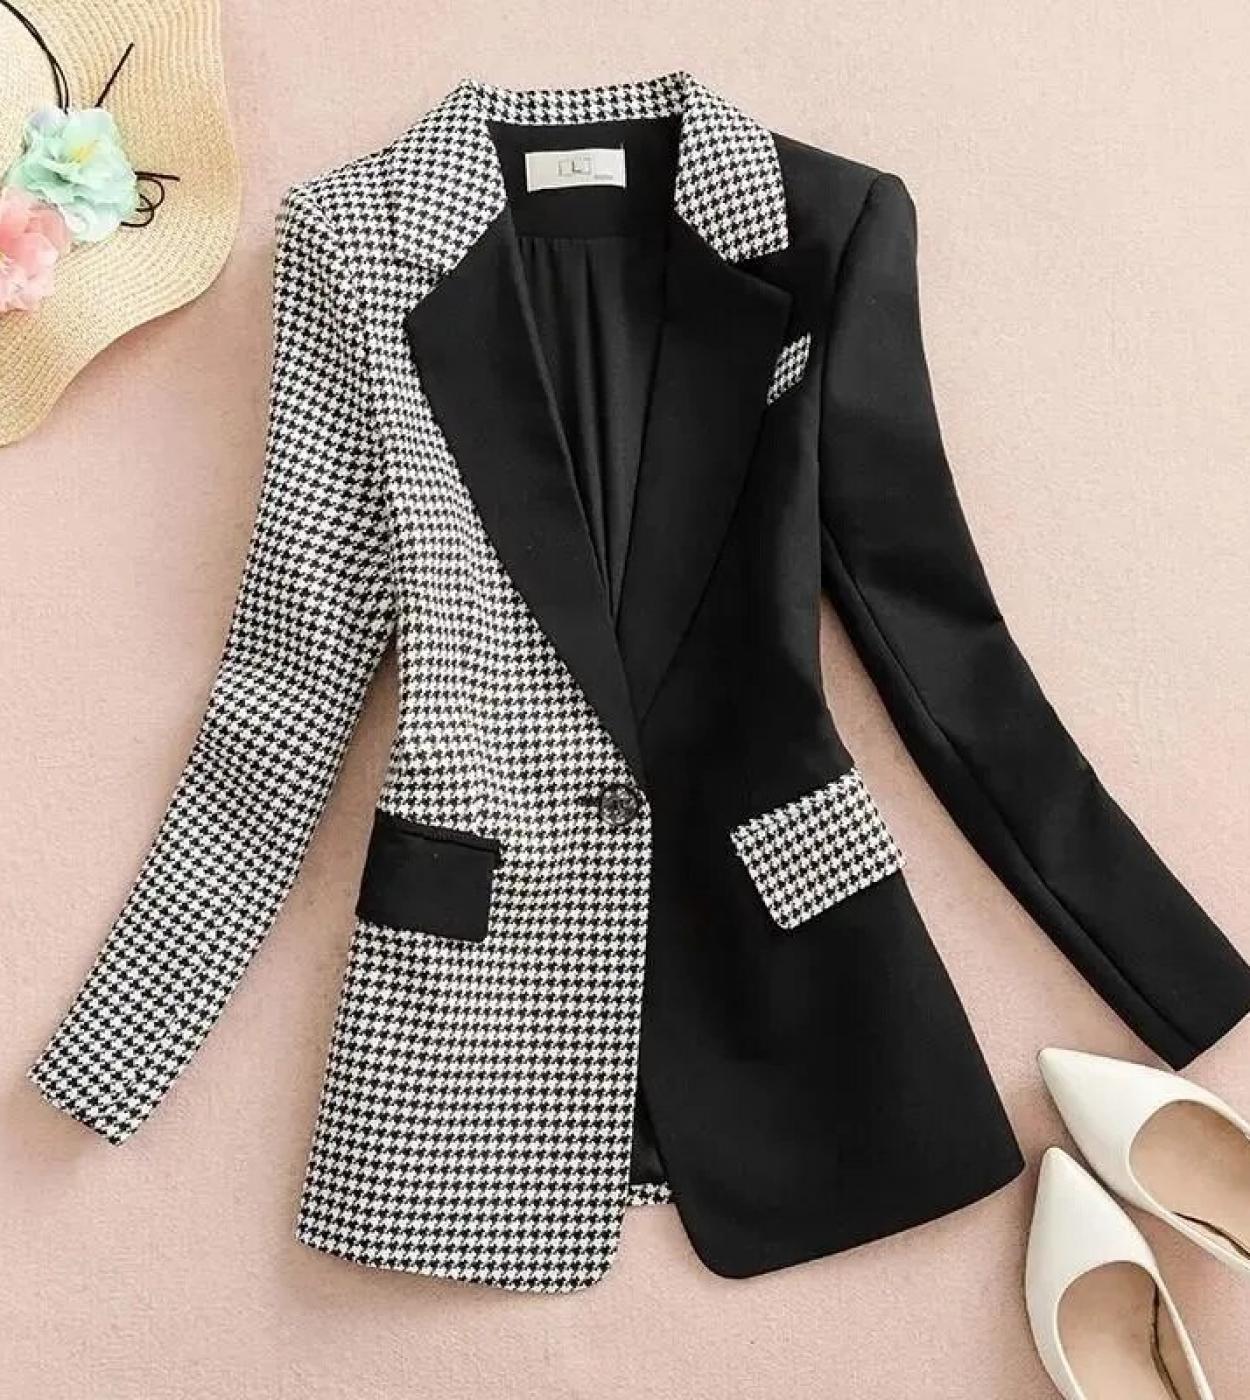 2022 New Autumn All Match Women Blazers Vintage Office Ladies Blazer Houndstooth Suits Coat Female Casual Office Slim Ou